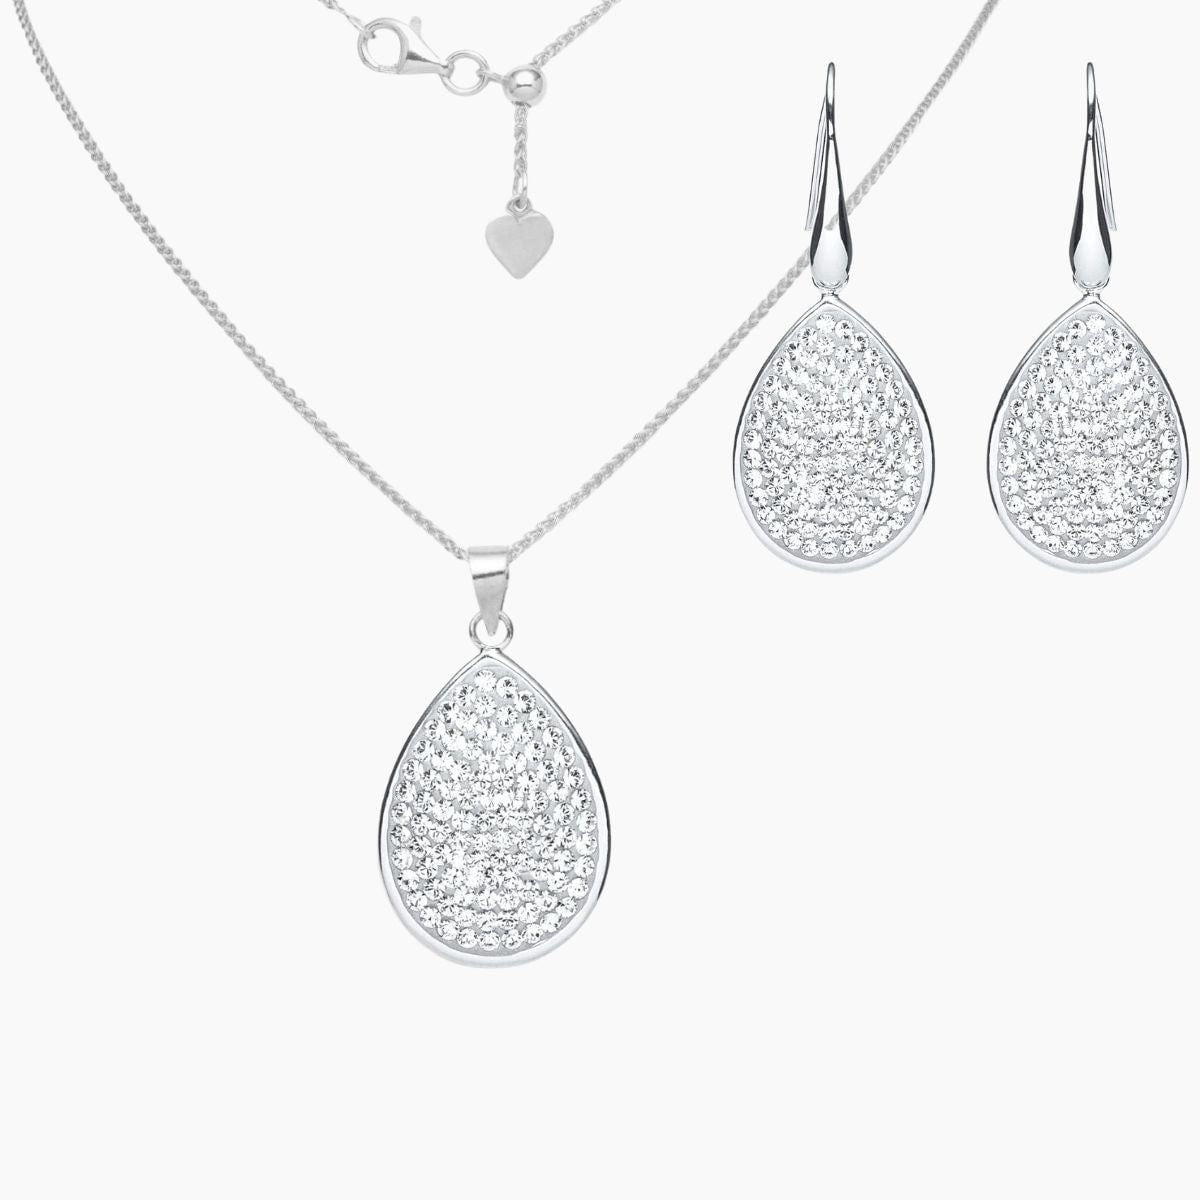 Amazon.com: Sivalya AMALFI Raw Emerald Necklace Earrings Set Sterling Silver  - Amalfi Jewelry Set for Women in Solid 925 Silver - Natural Pear Green  Stones - Emerald Gemstone Jewelry- Gift Packaging Included : Handmade  Products